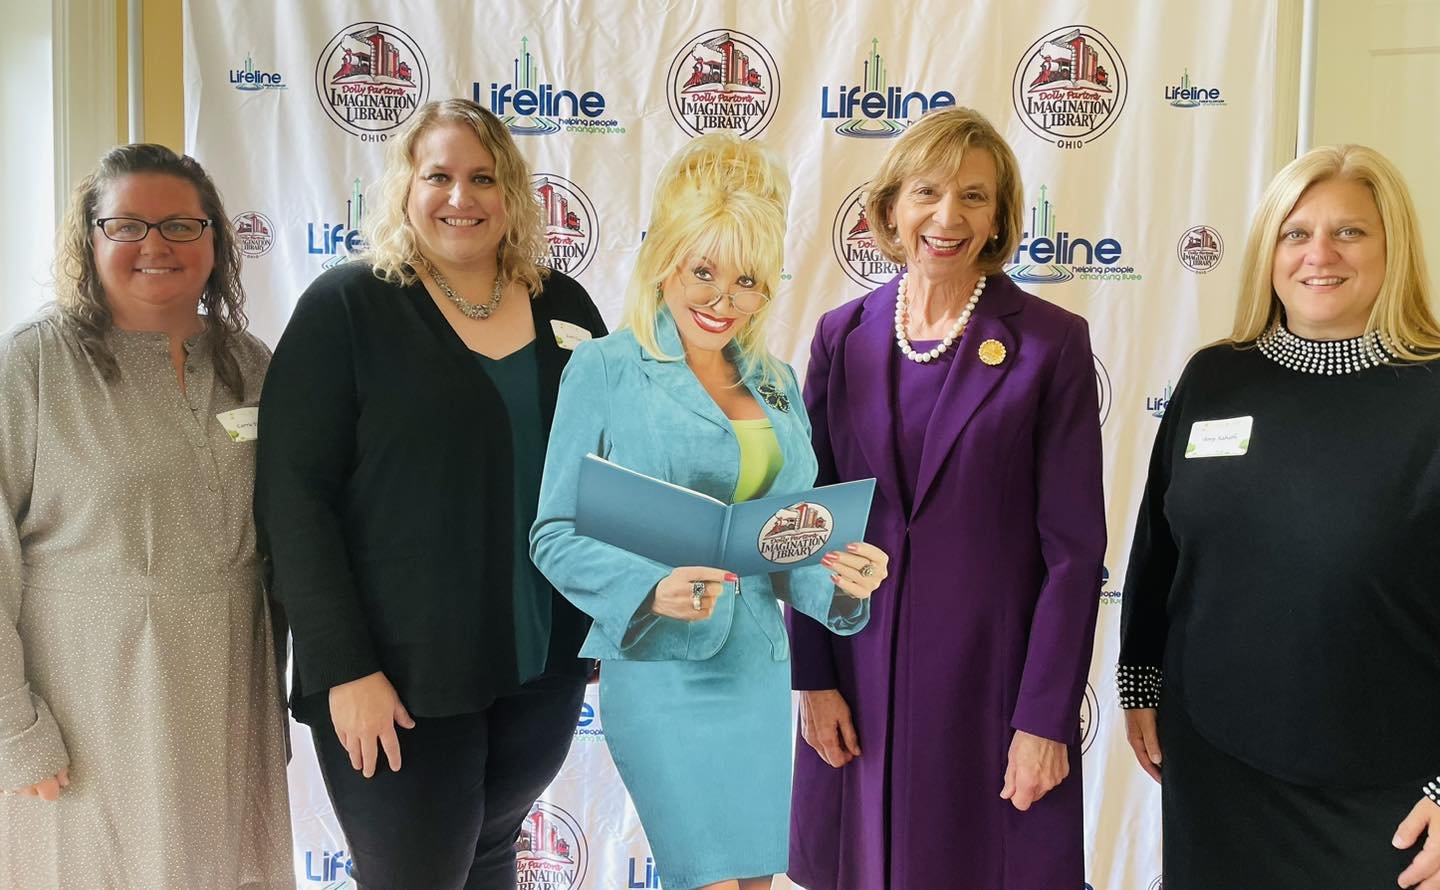   Lifeline hosted their first Imagination Library luncheon to benefit Lake County’s Imagination Library program this fall.  